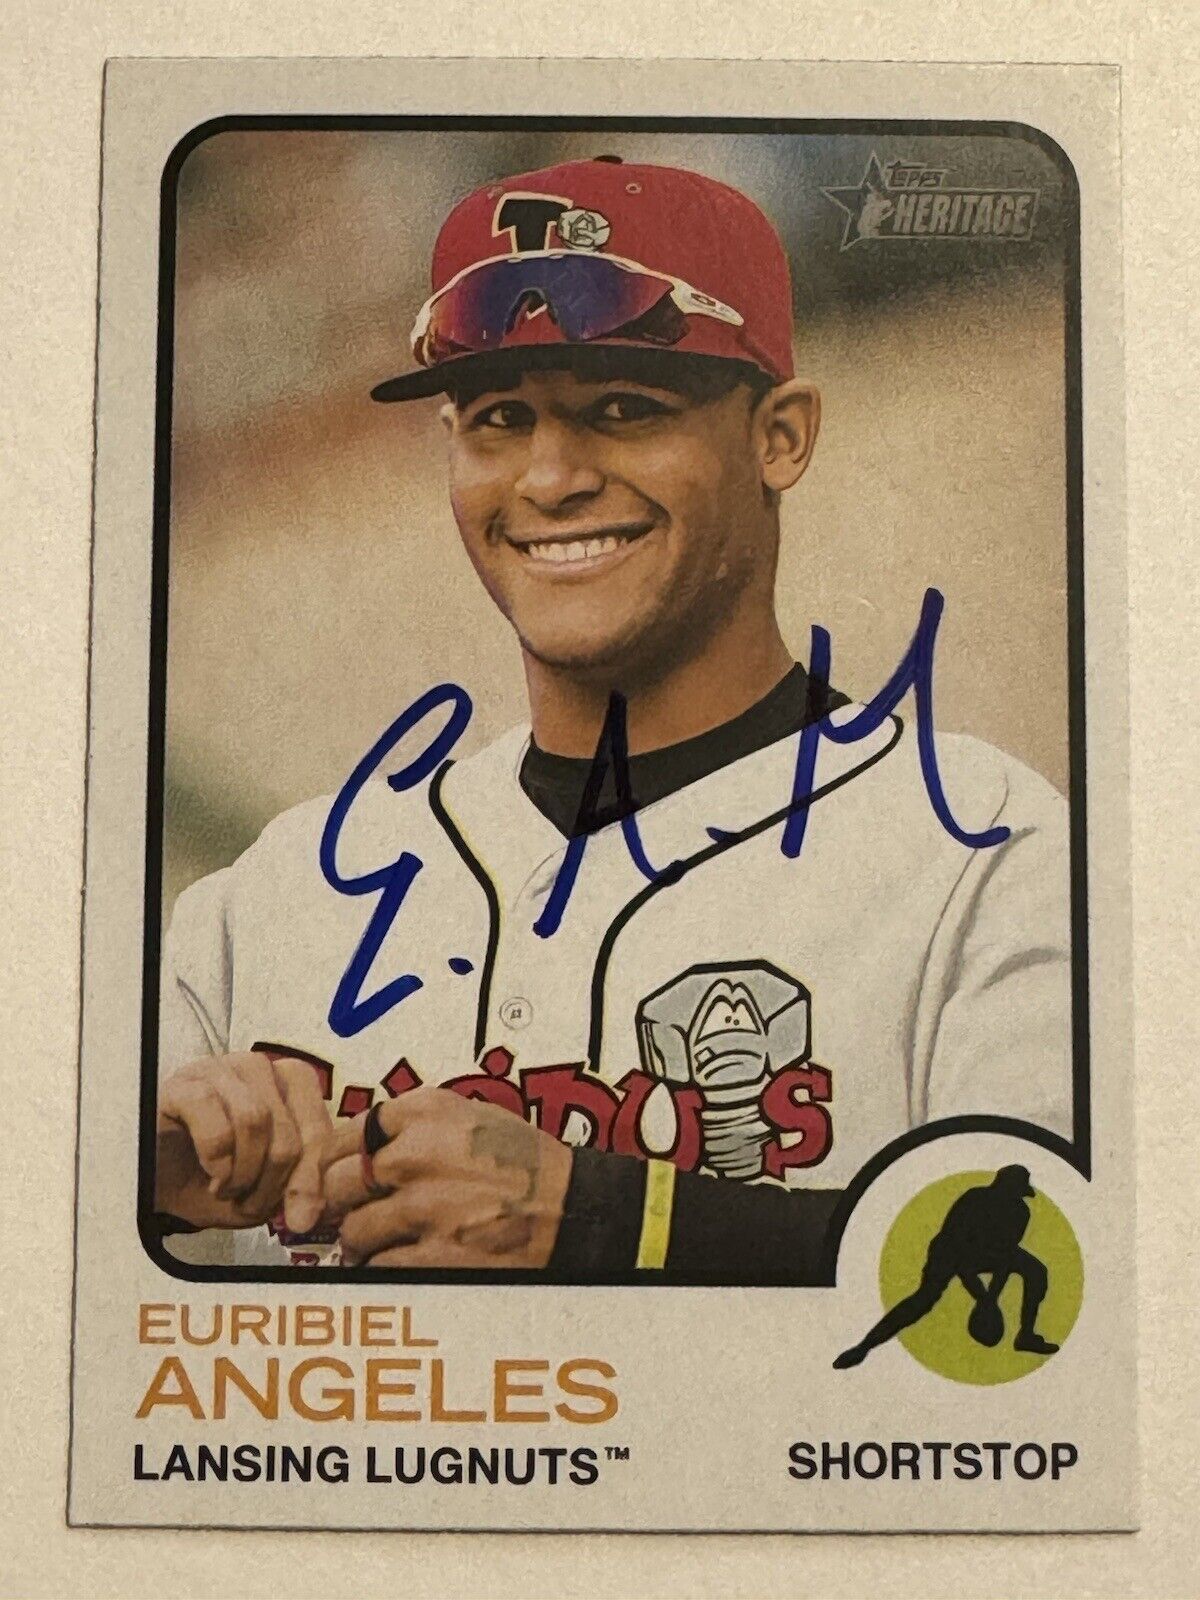 2022 TOPPS HERITAGE MINORS EURIBIEL ANGELES IP SIGNED CARD